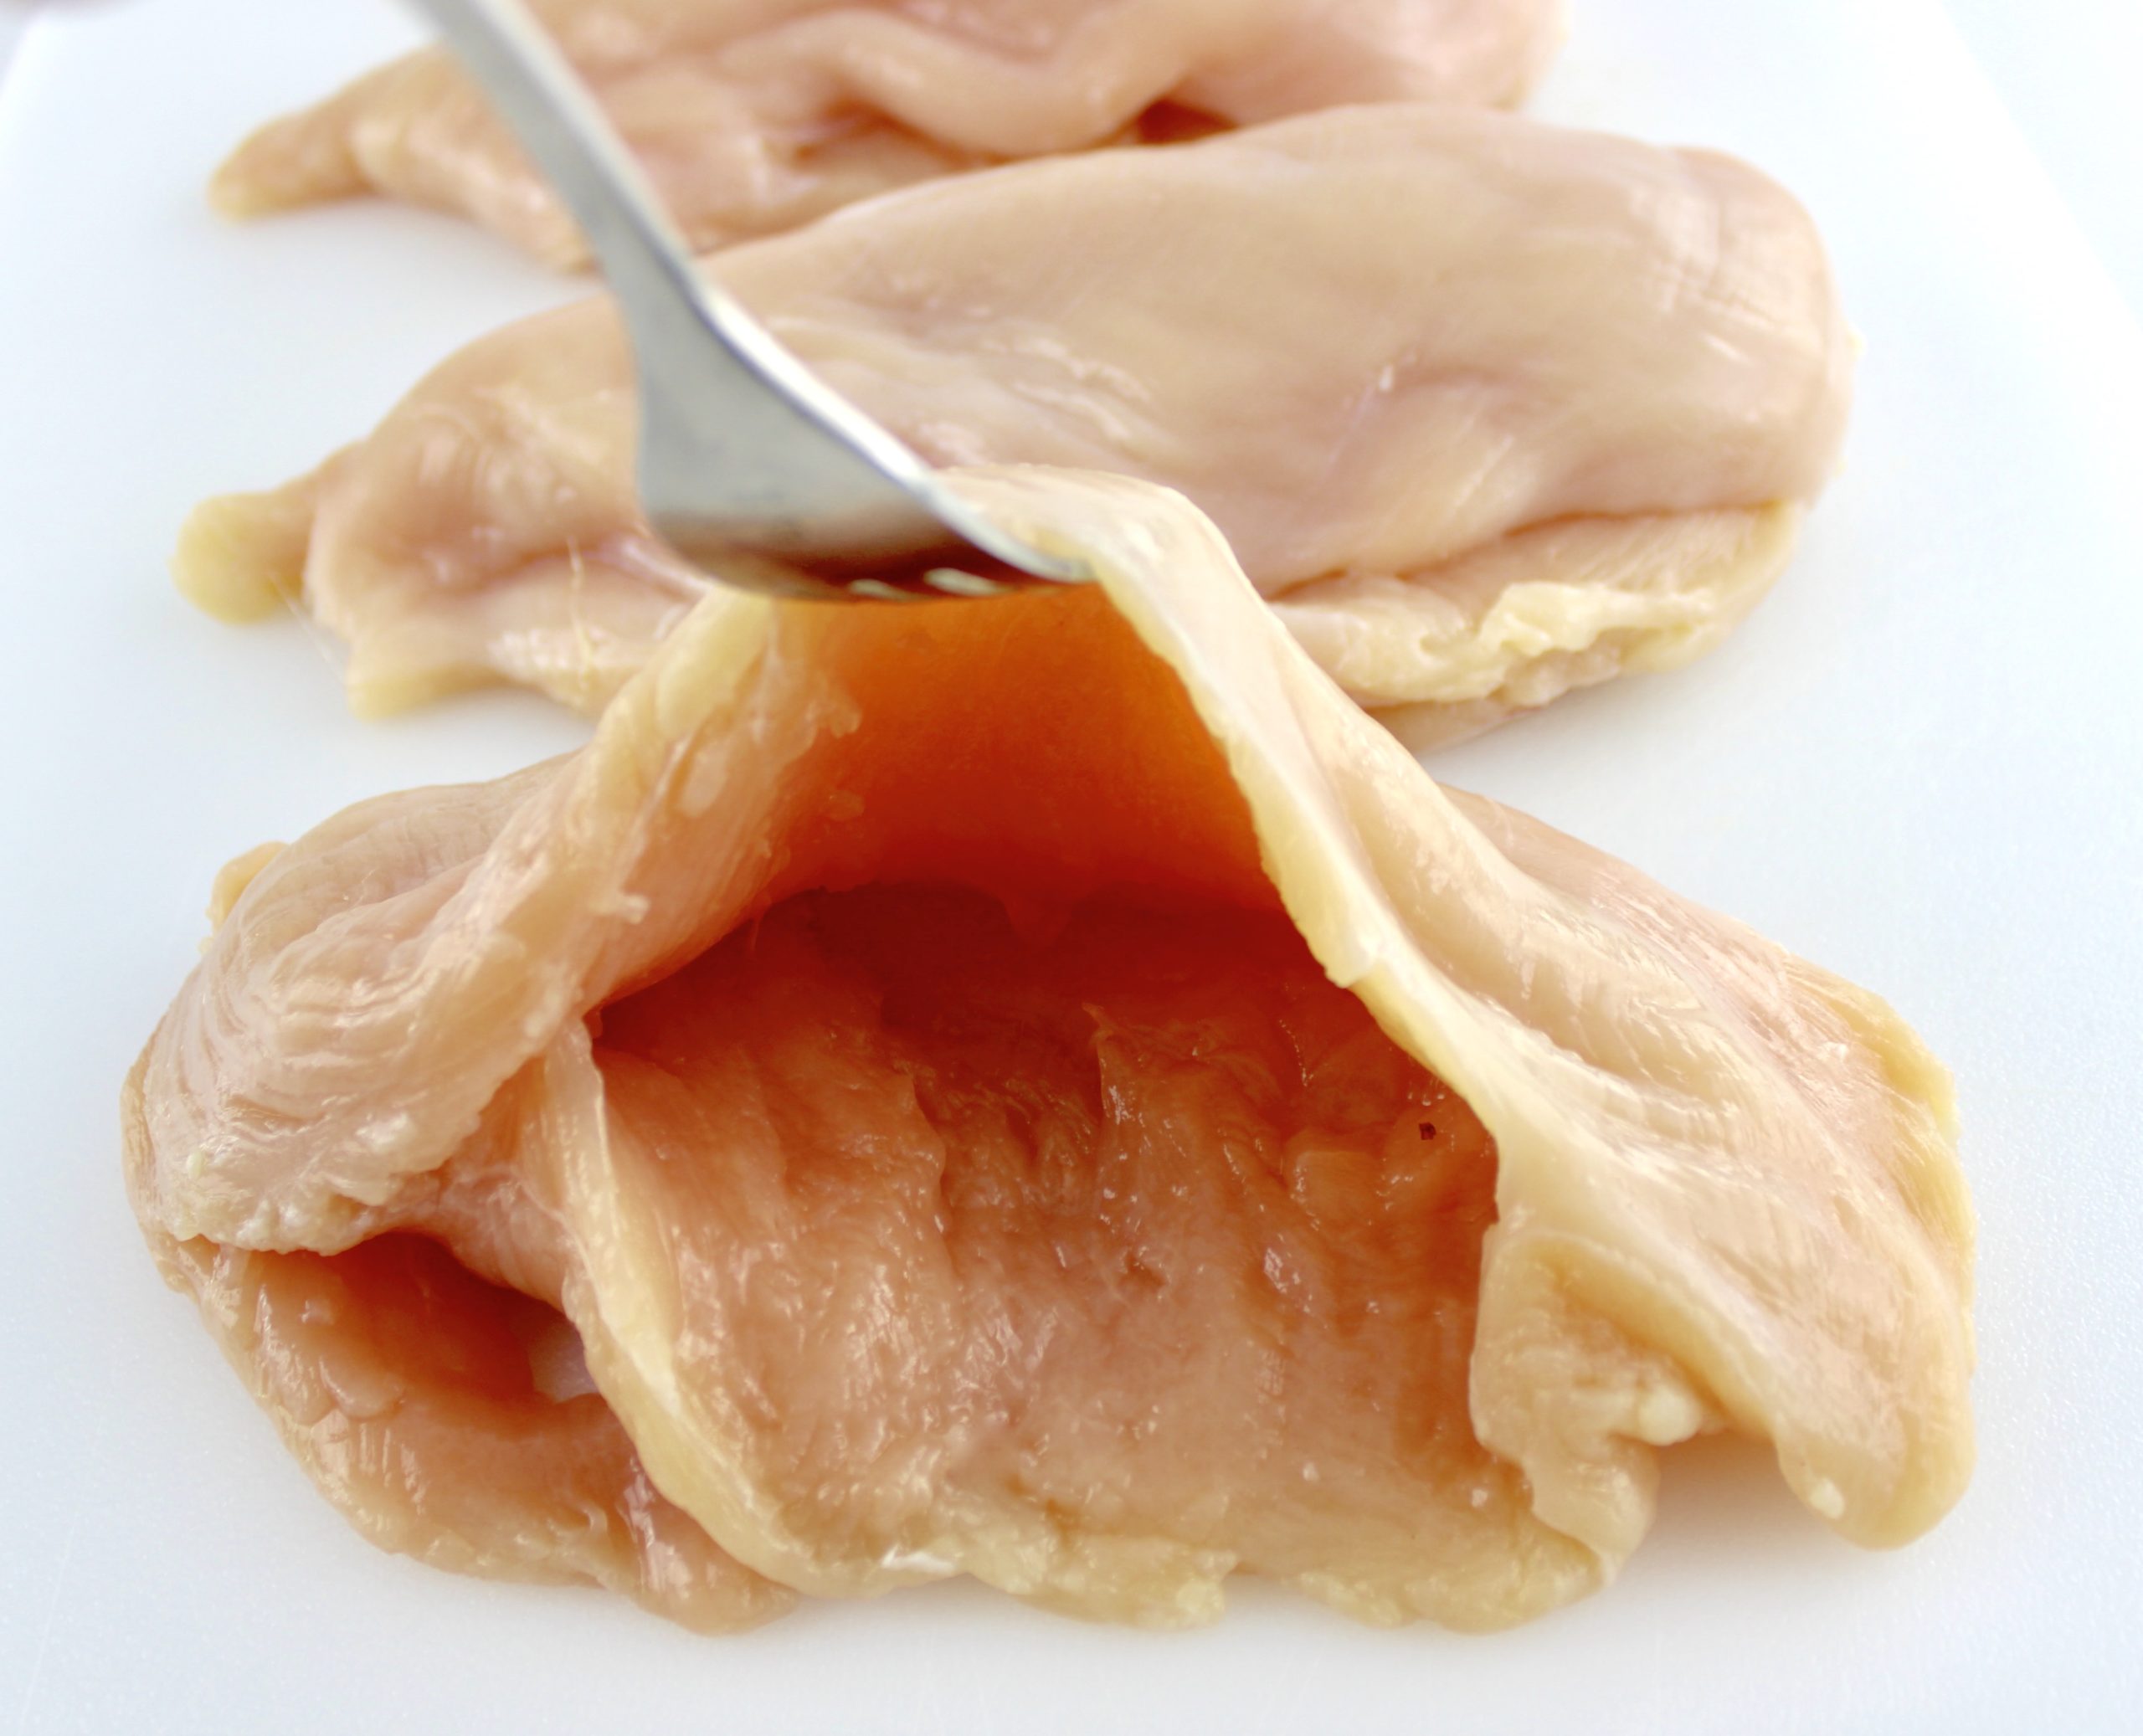 chicken breast cut open being held open with fork